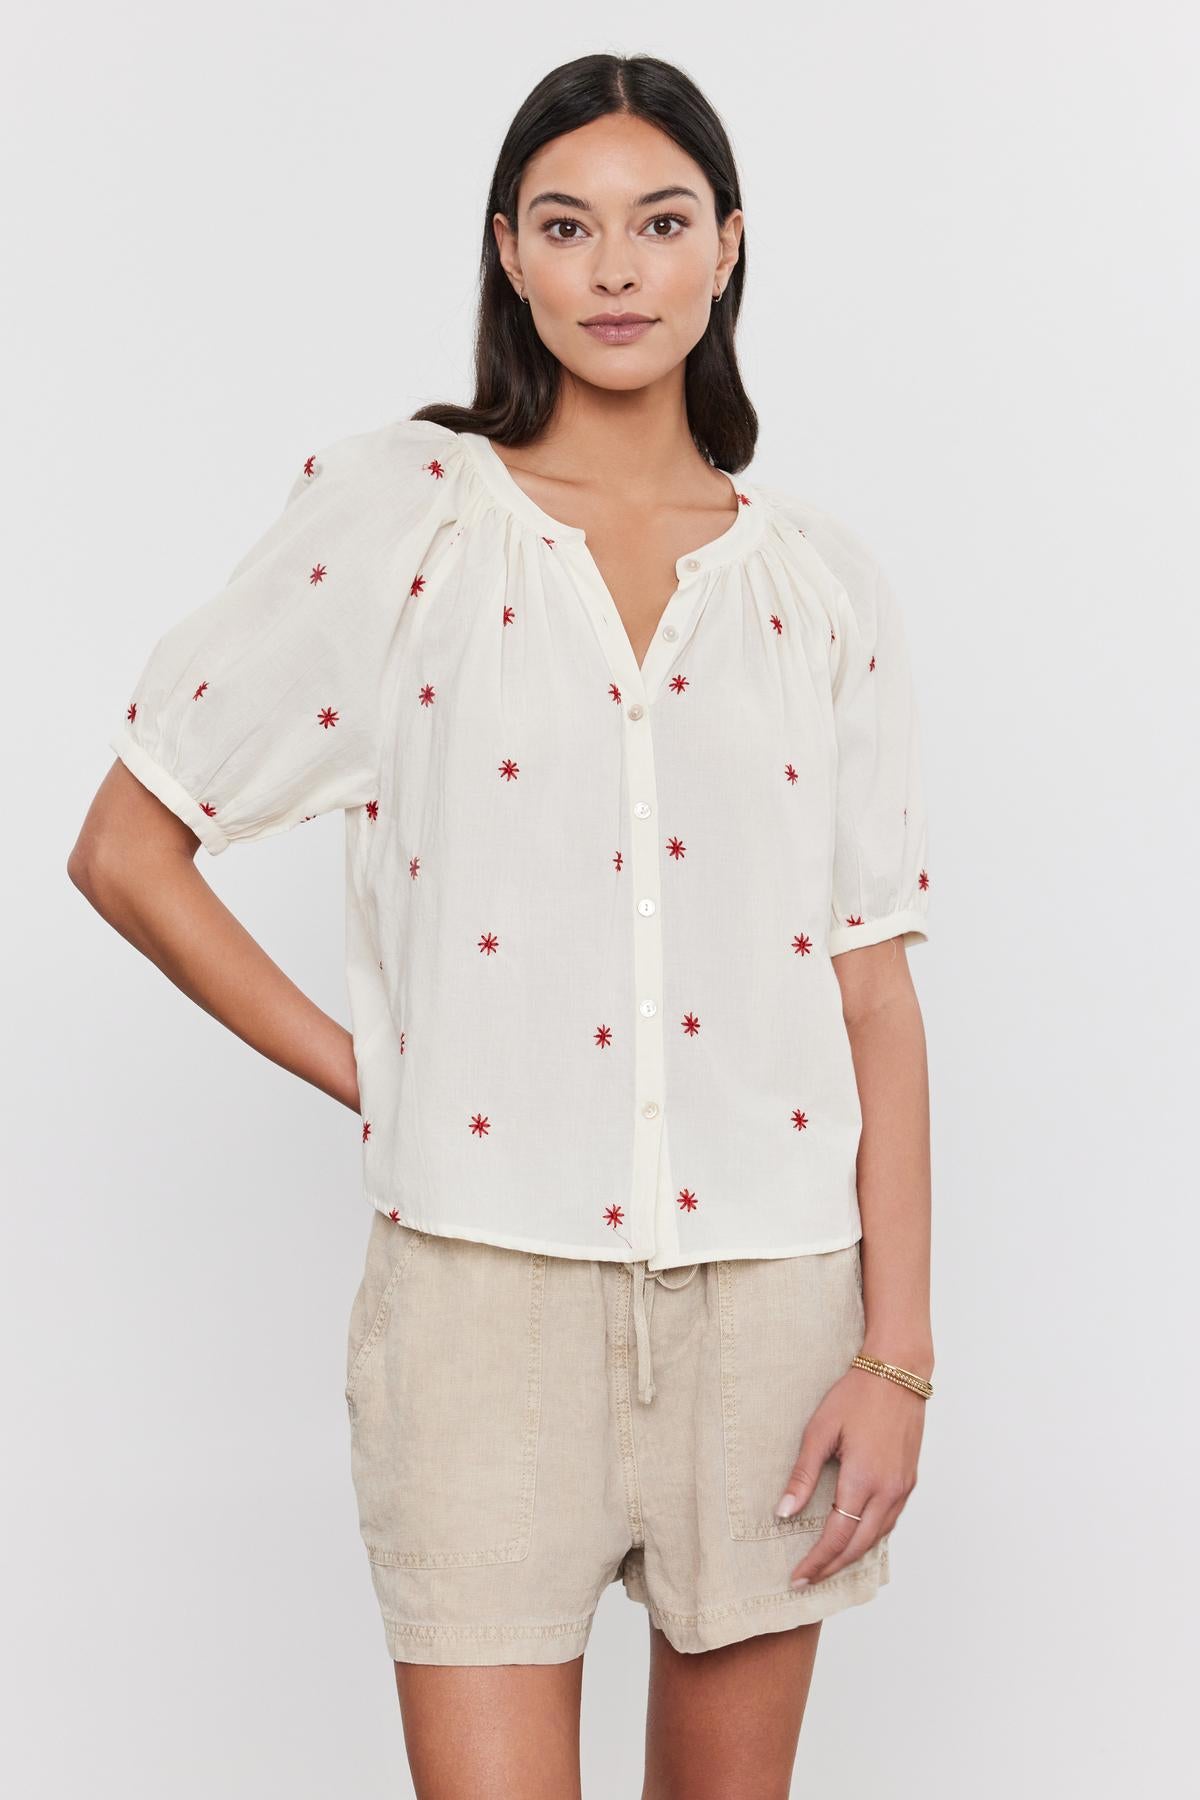 A woman wearing a white AMIRA TOP with red floral embroidery and beige shorts, standing against a plain background. Brand Name: Velvet by Graham & Spencer-36910000341185